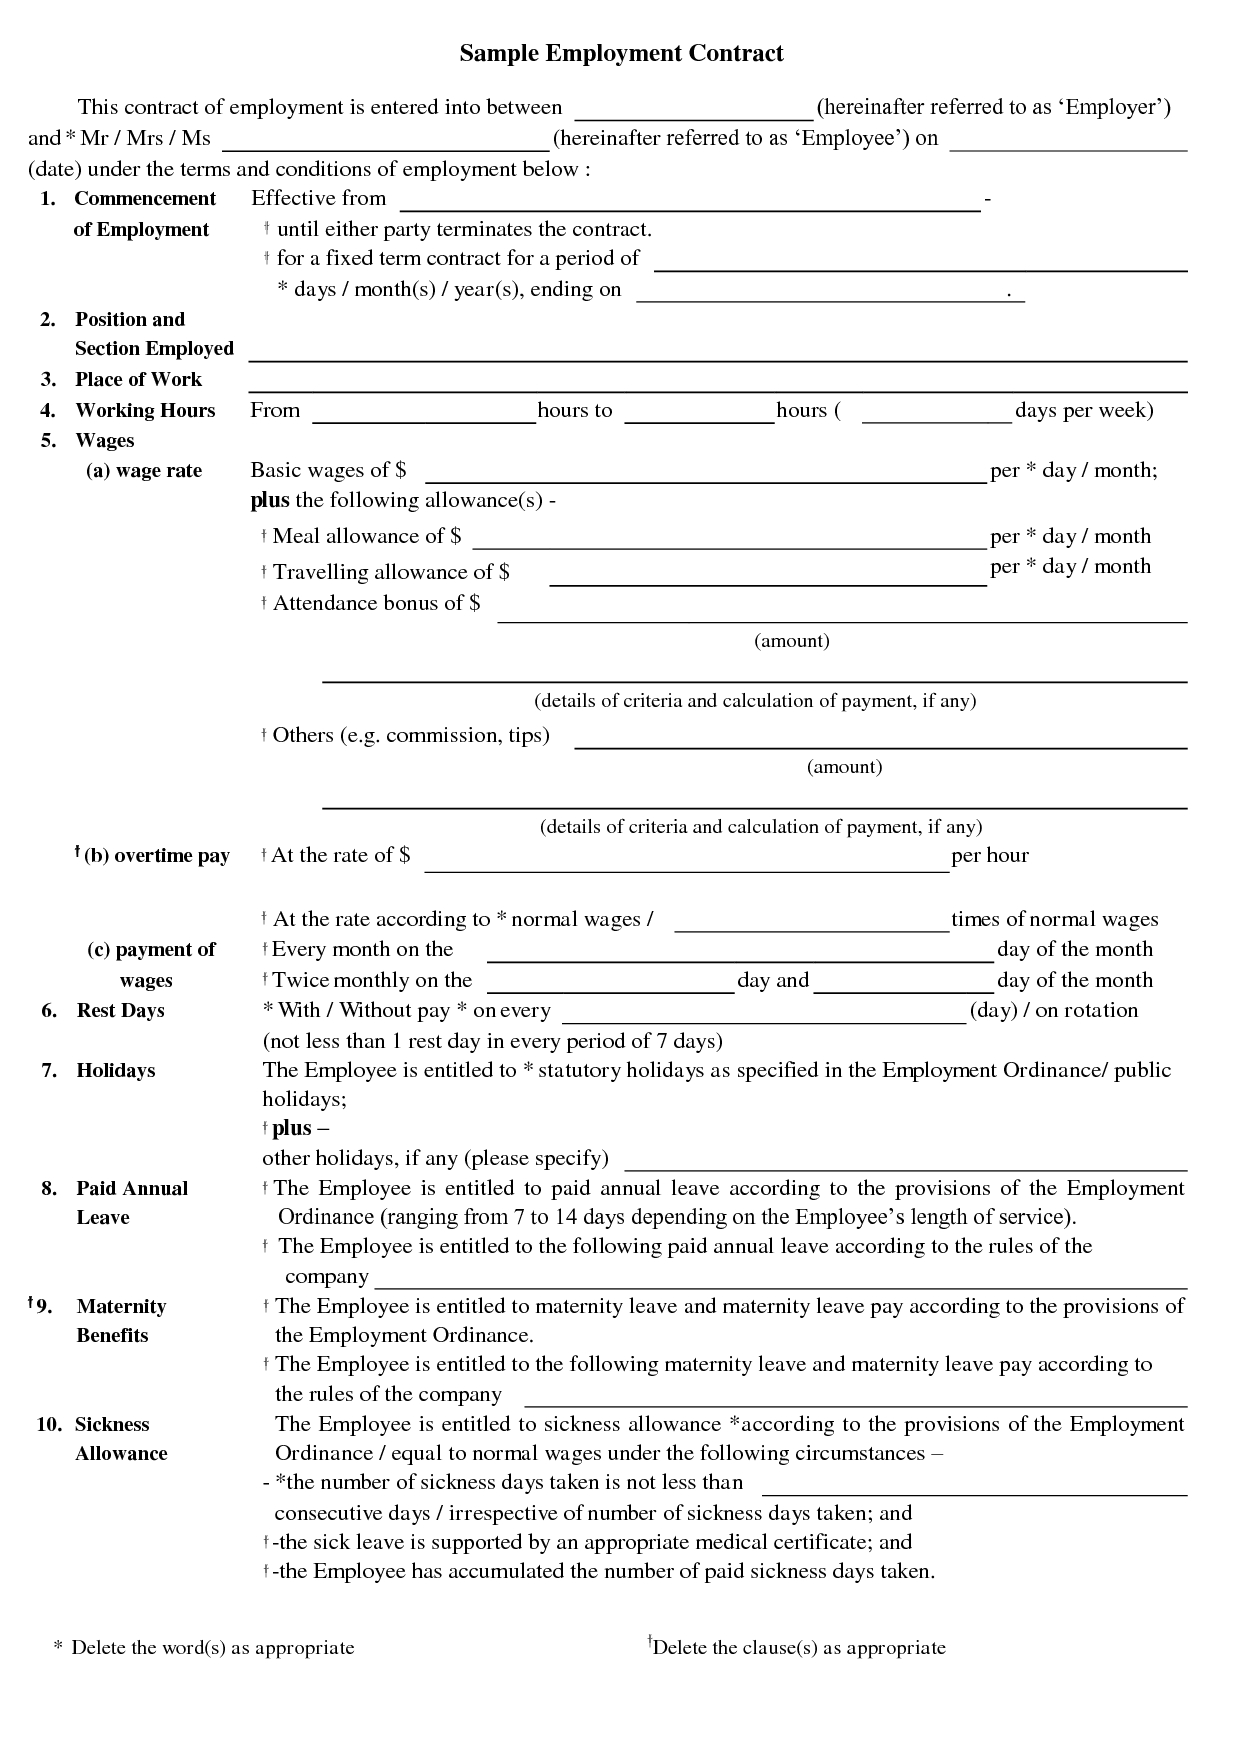 50 Free Independent Contractor Agreement Forms Templates Free Printable Contracts Free